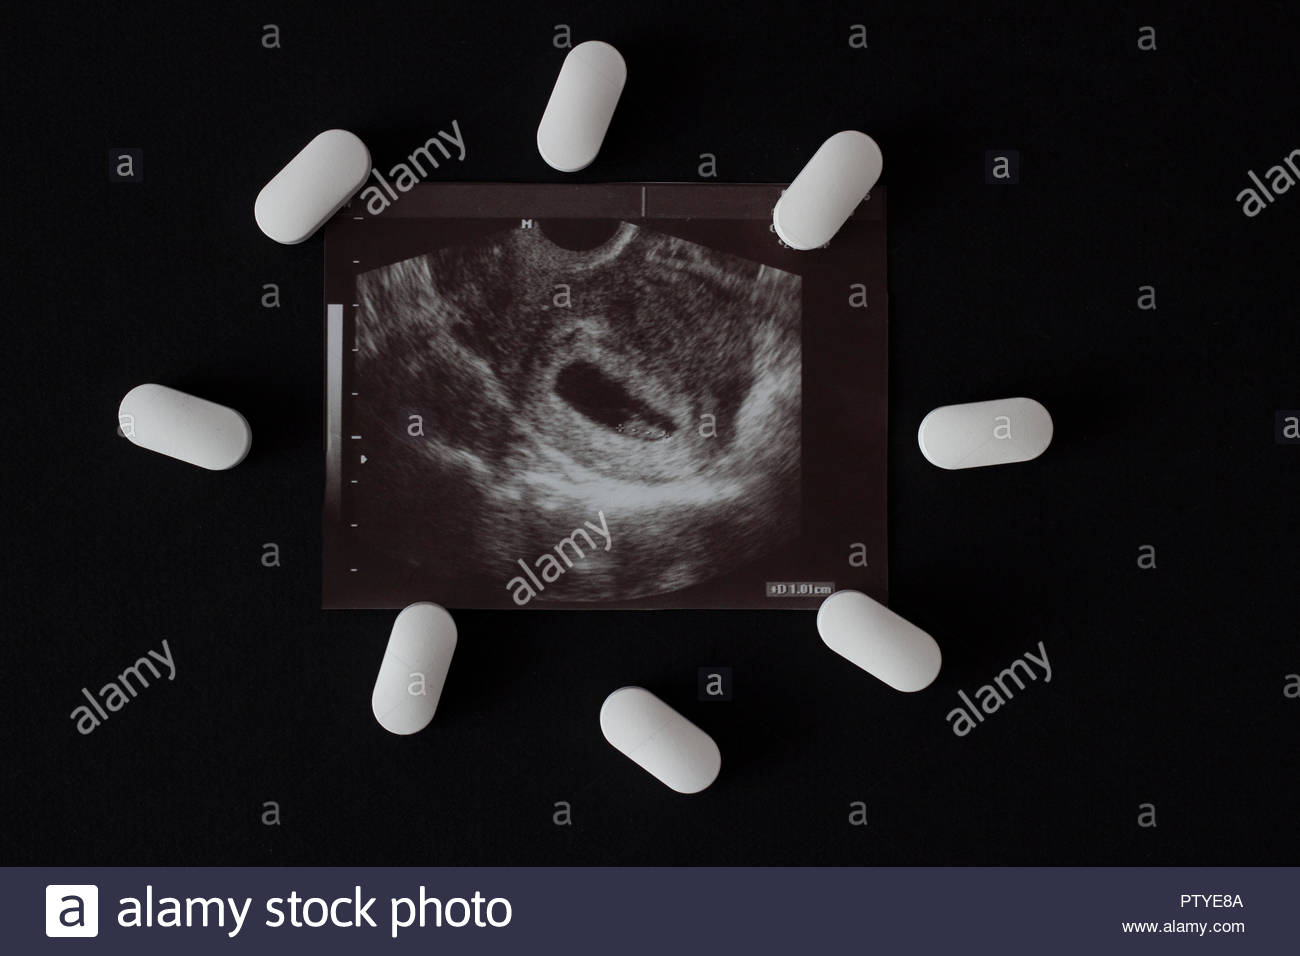 Uzi Pregnancy Tablets And Abortion Black Background Stock Photo